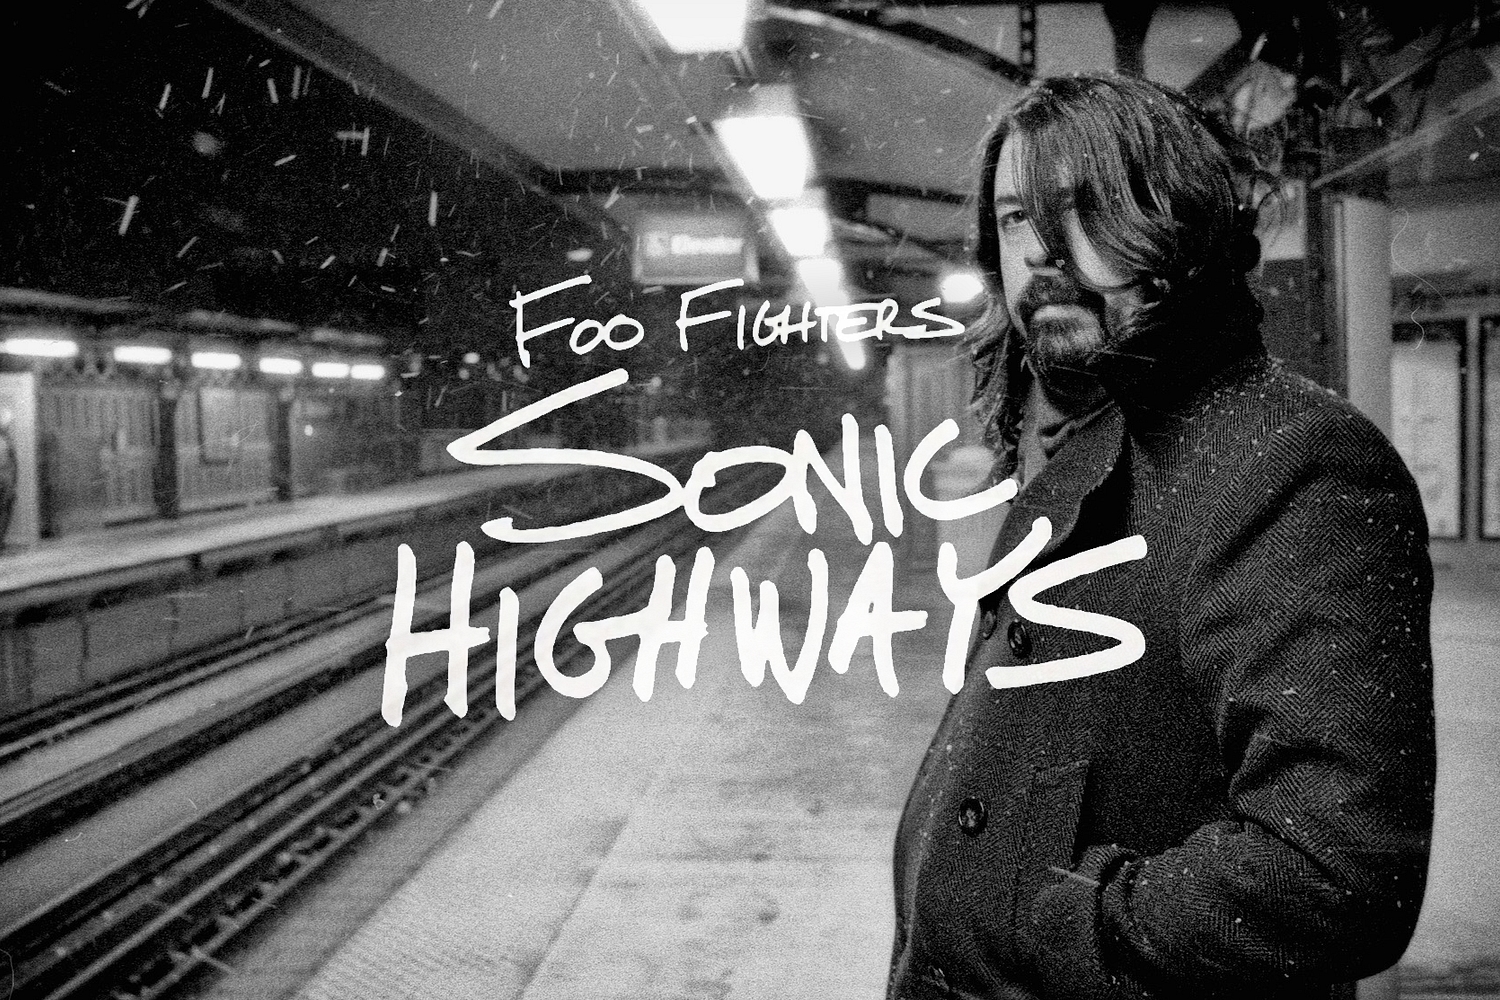 Foo Fighters hint at three UK club shows this week